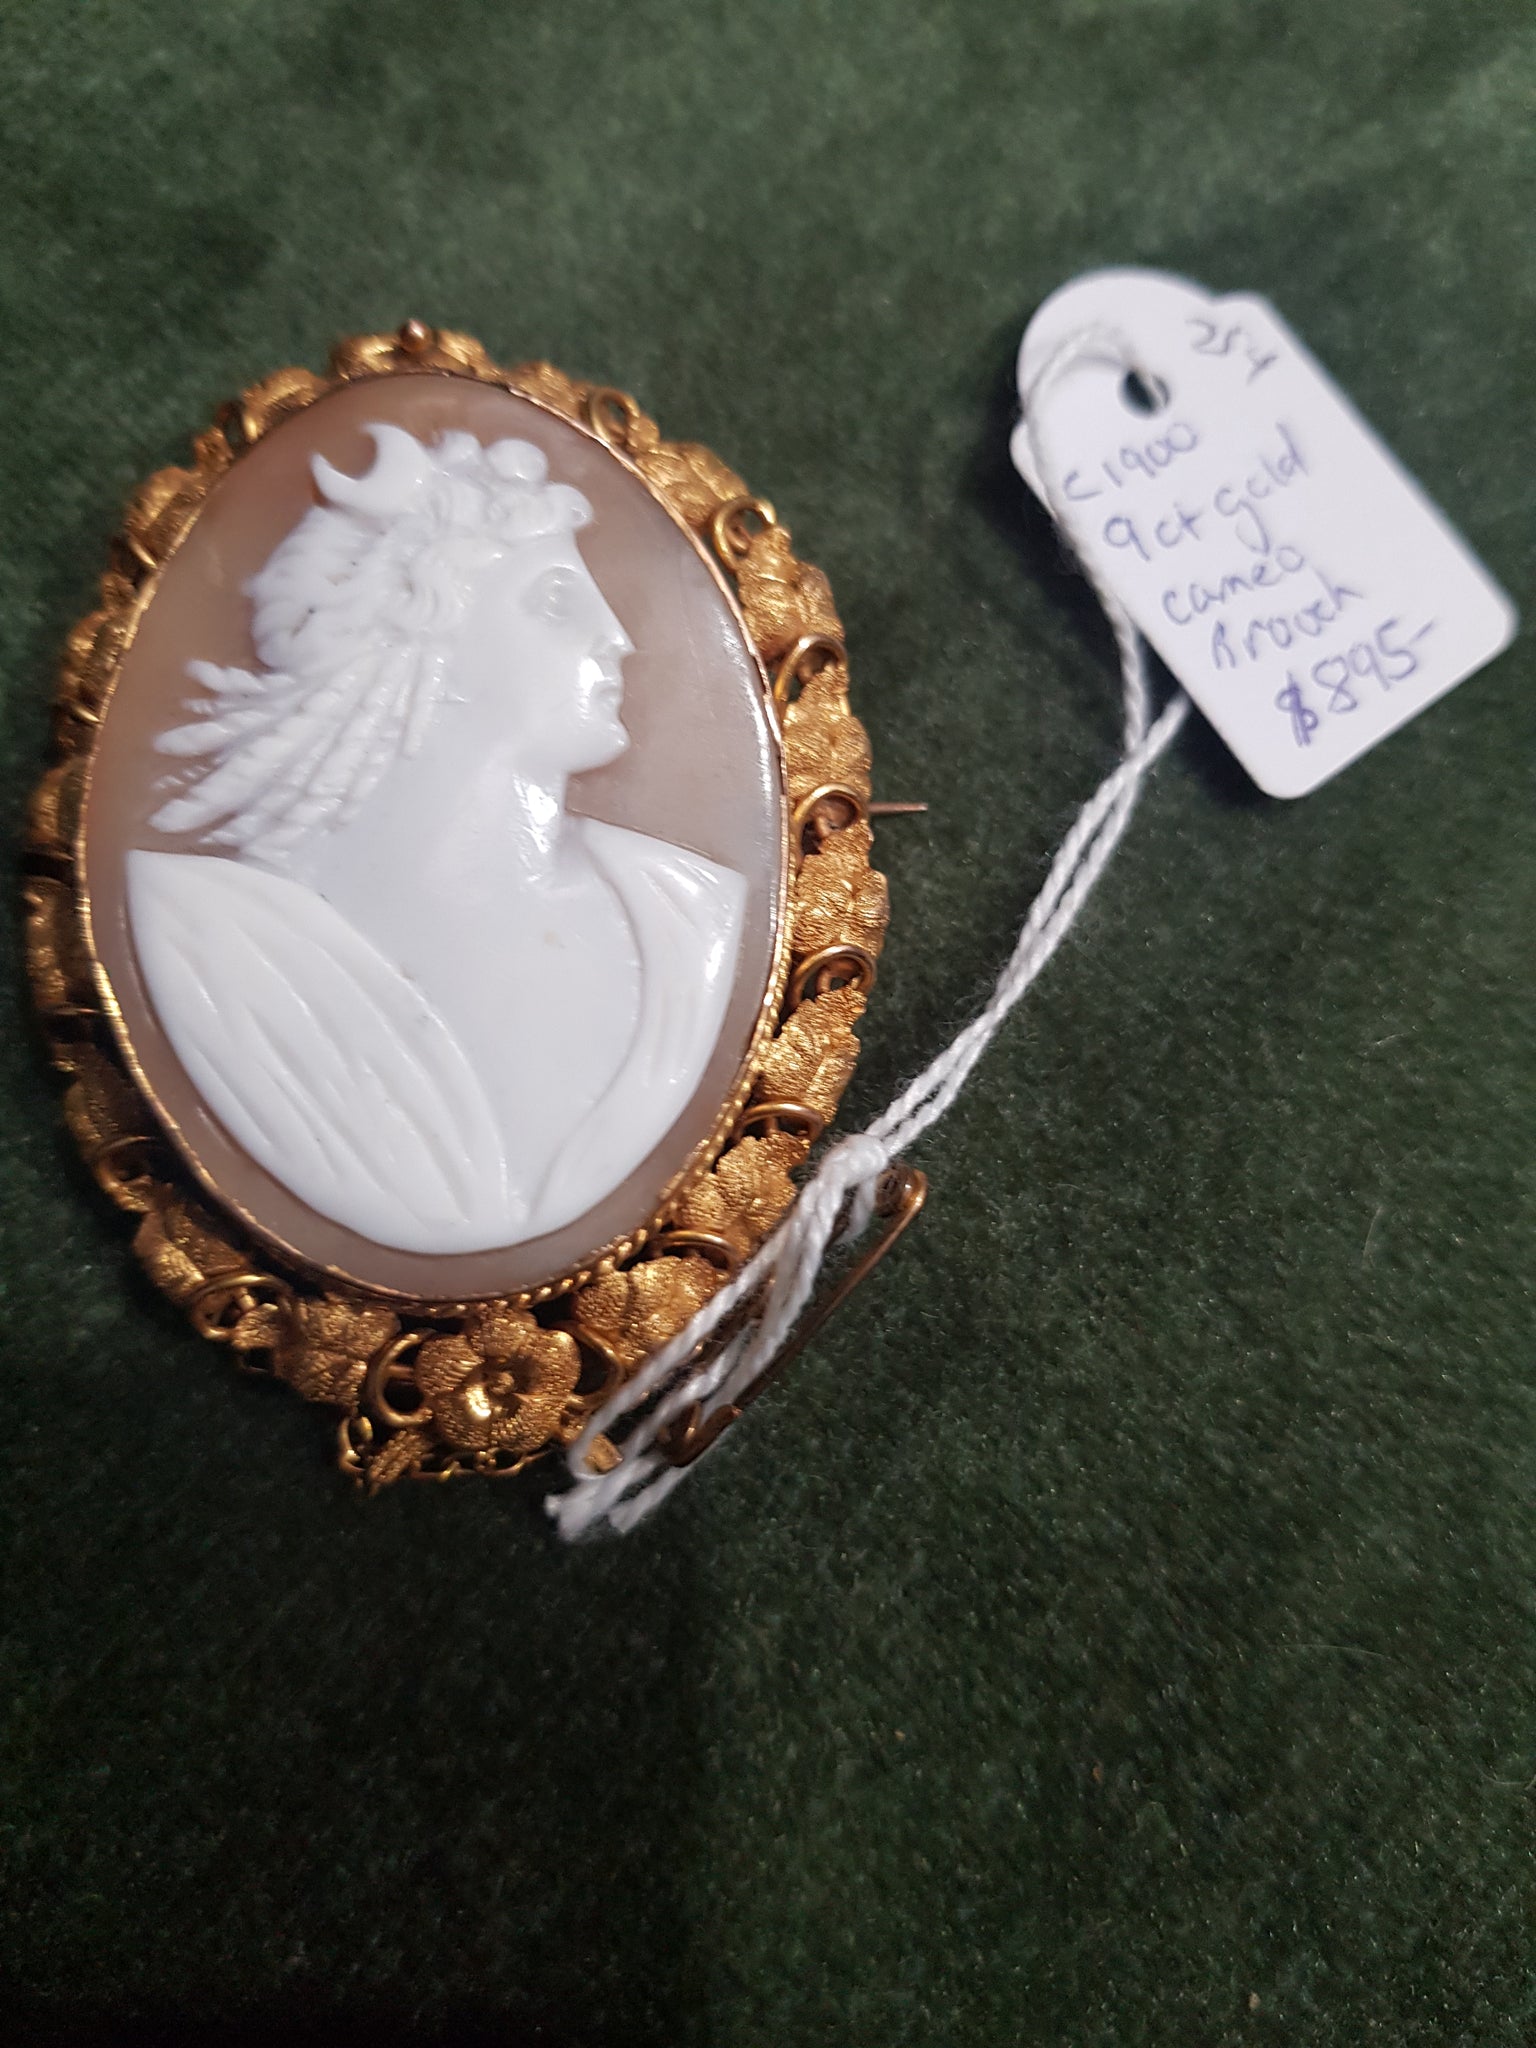 c1900 9ct Gold and cameo brooch #254